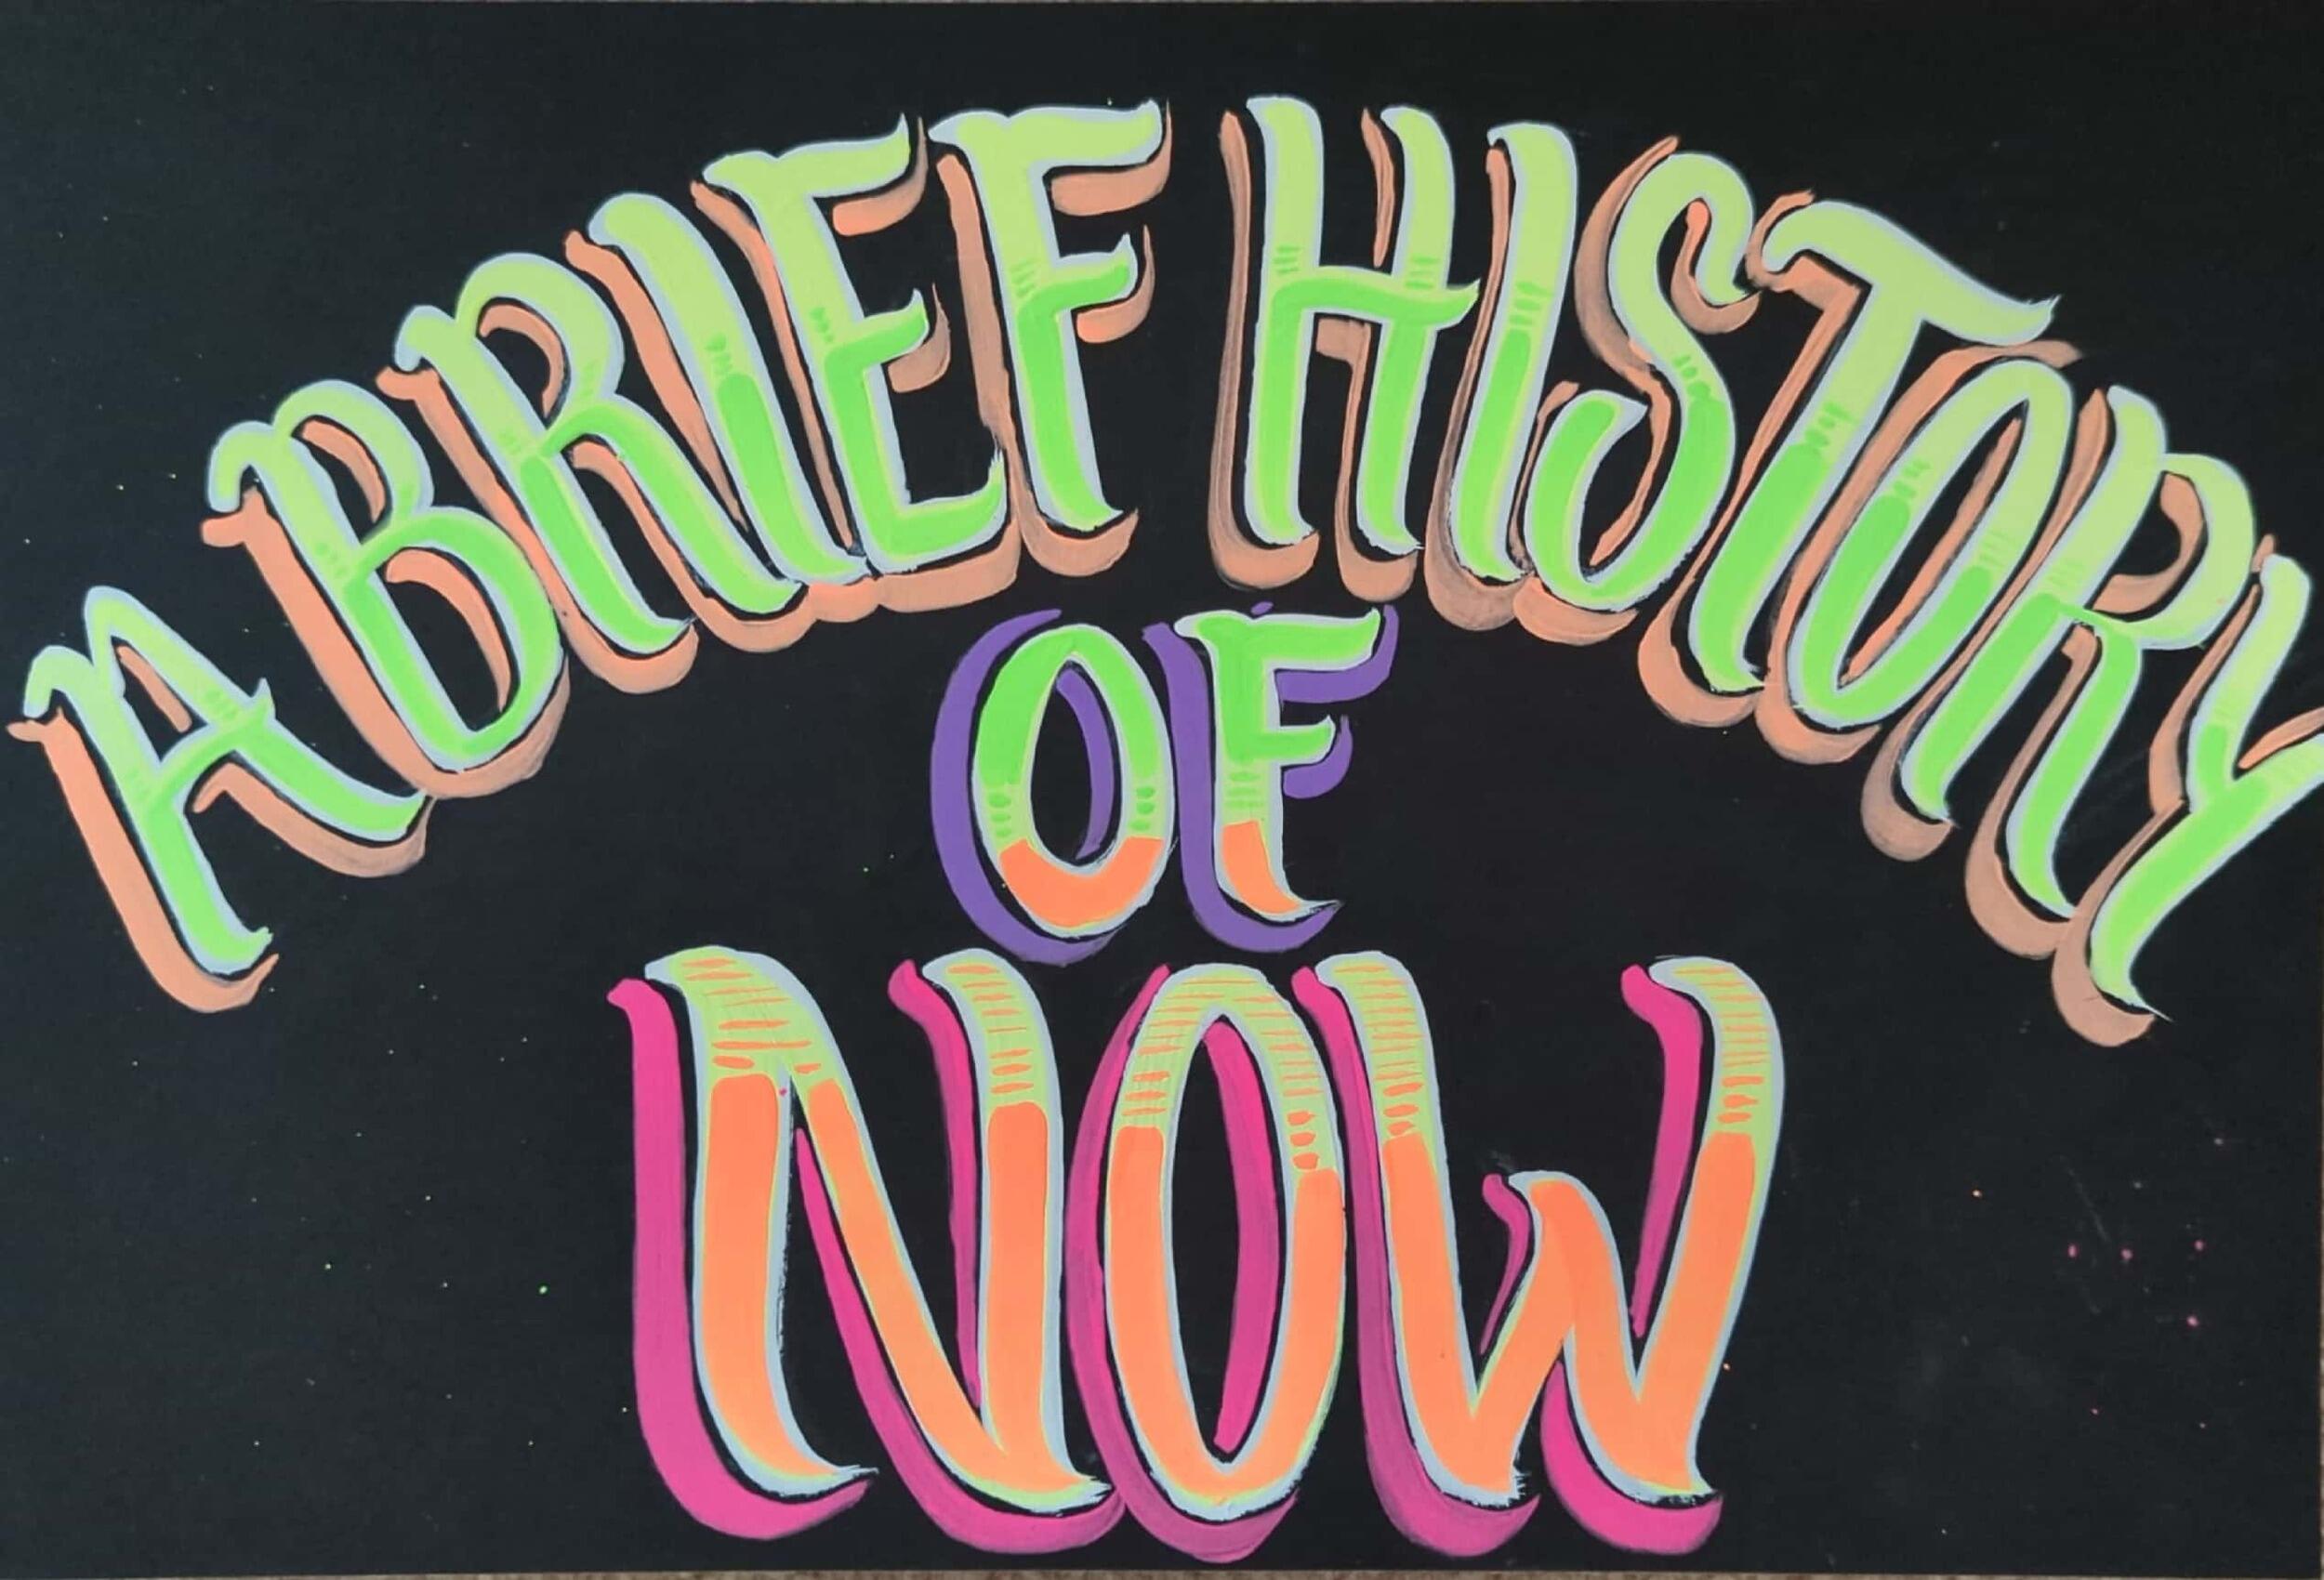 Text that says \"A brief History\" in orange and green letters, \"of\" in orange, green and purple letters, and \"Now\" in pink, green and orange letters. 